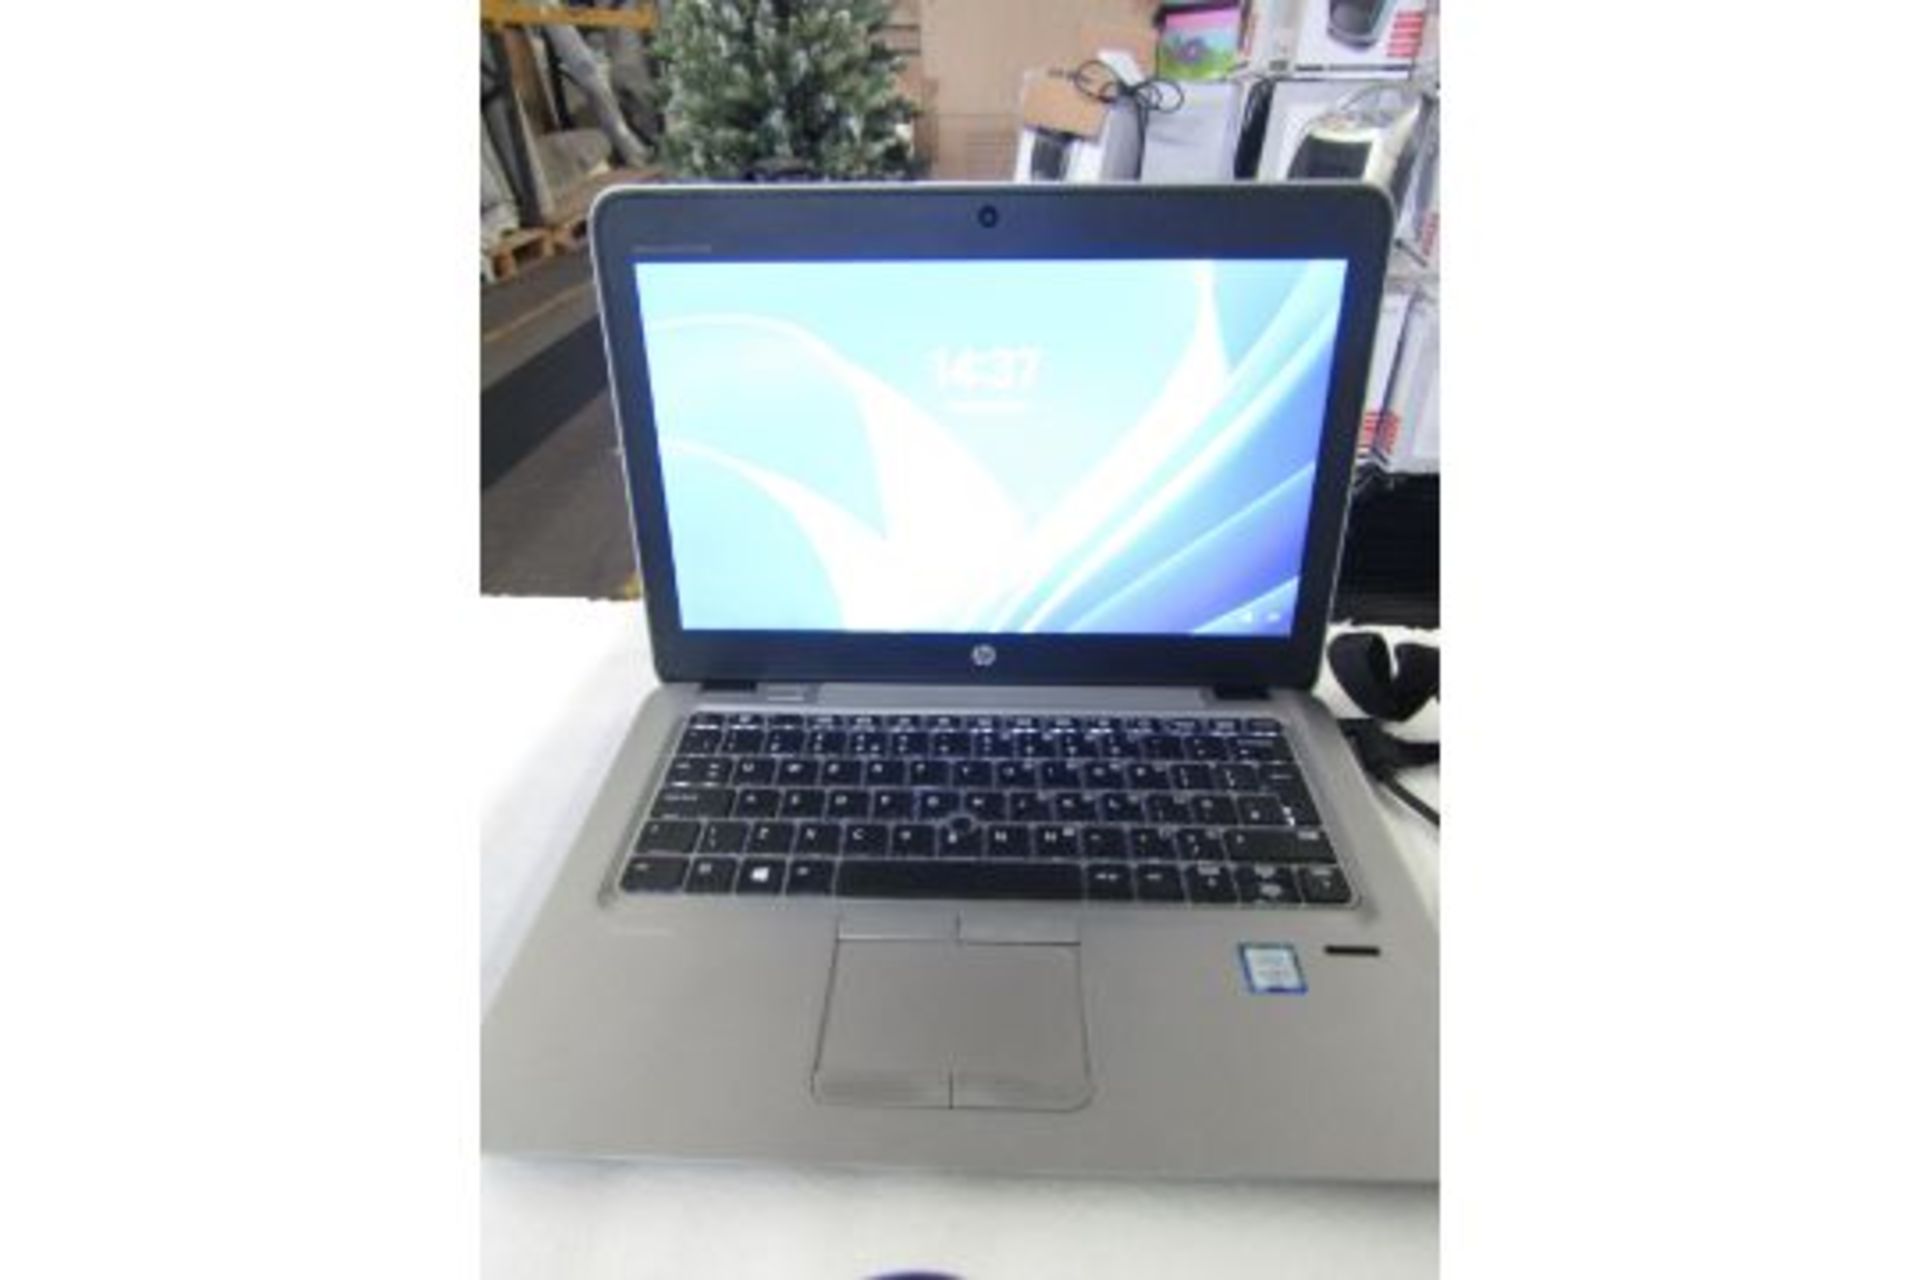 HP Elitebook 820 G3 core i5-6200U processor, 256gb disc and 8Gb ram, powers on and goes through to